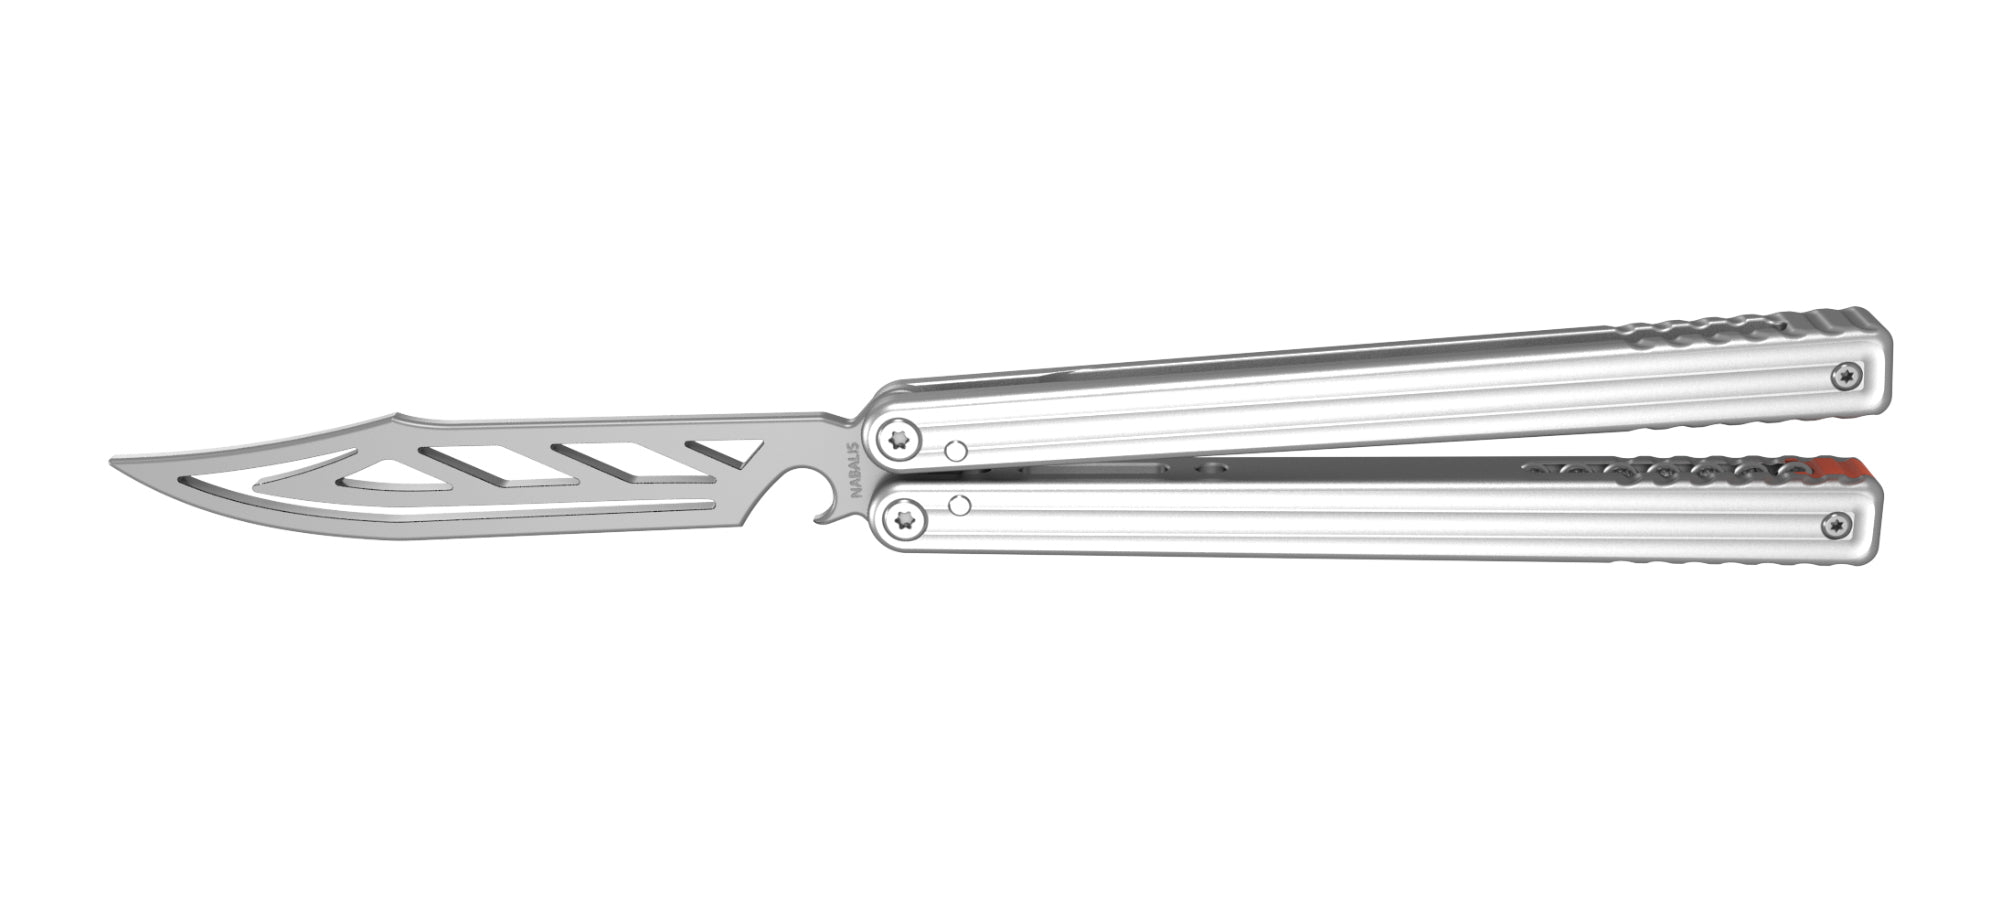 https://cdn.shopify.com/s/files/1/0572/1410/7798/files/Nabalis_Marble_balisong_butterfly_knife_trainer-Silver-6_Easy_Balisong_Butterfly_Knife_Beginner_Tricks_to_Practice